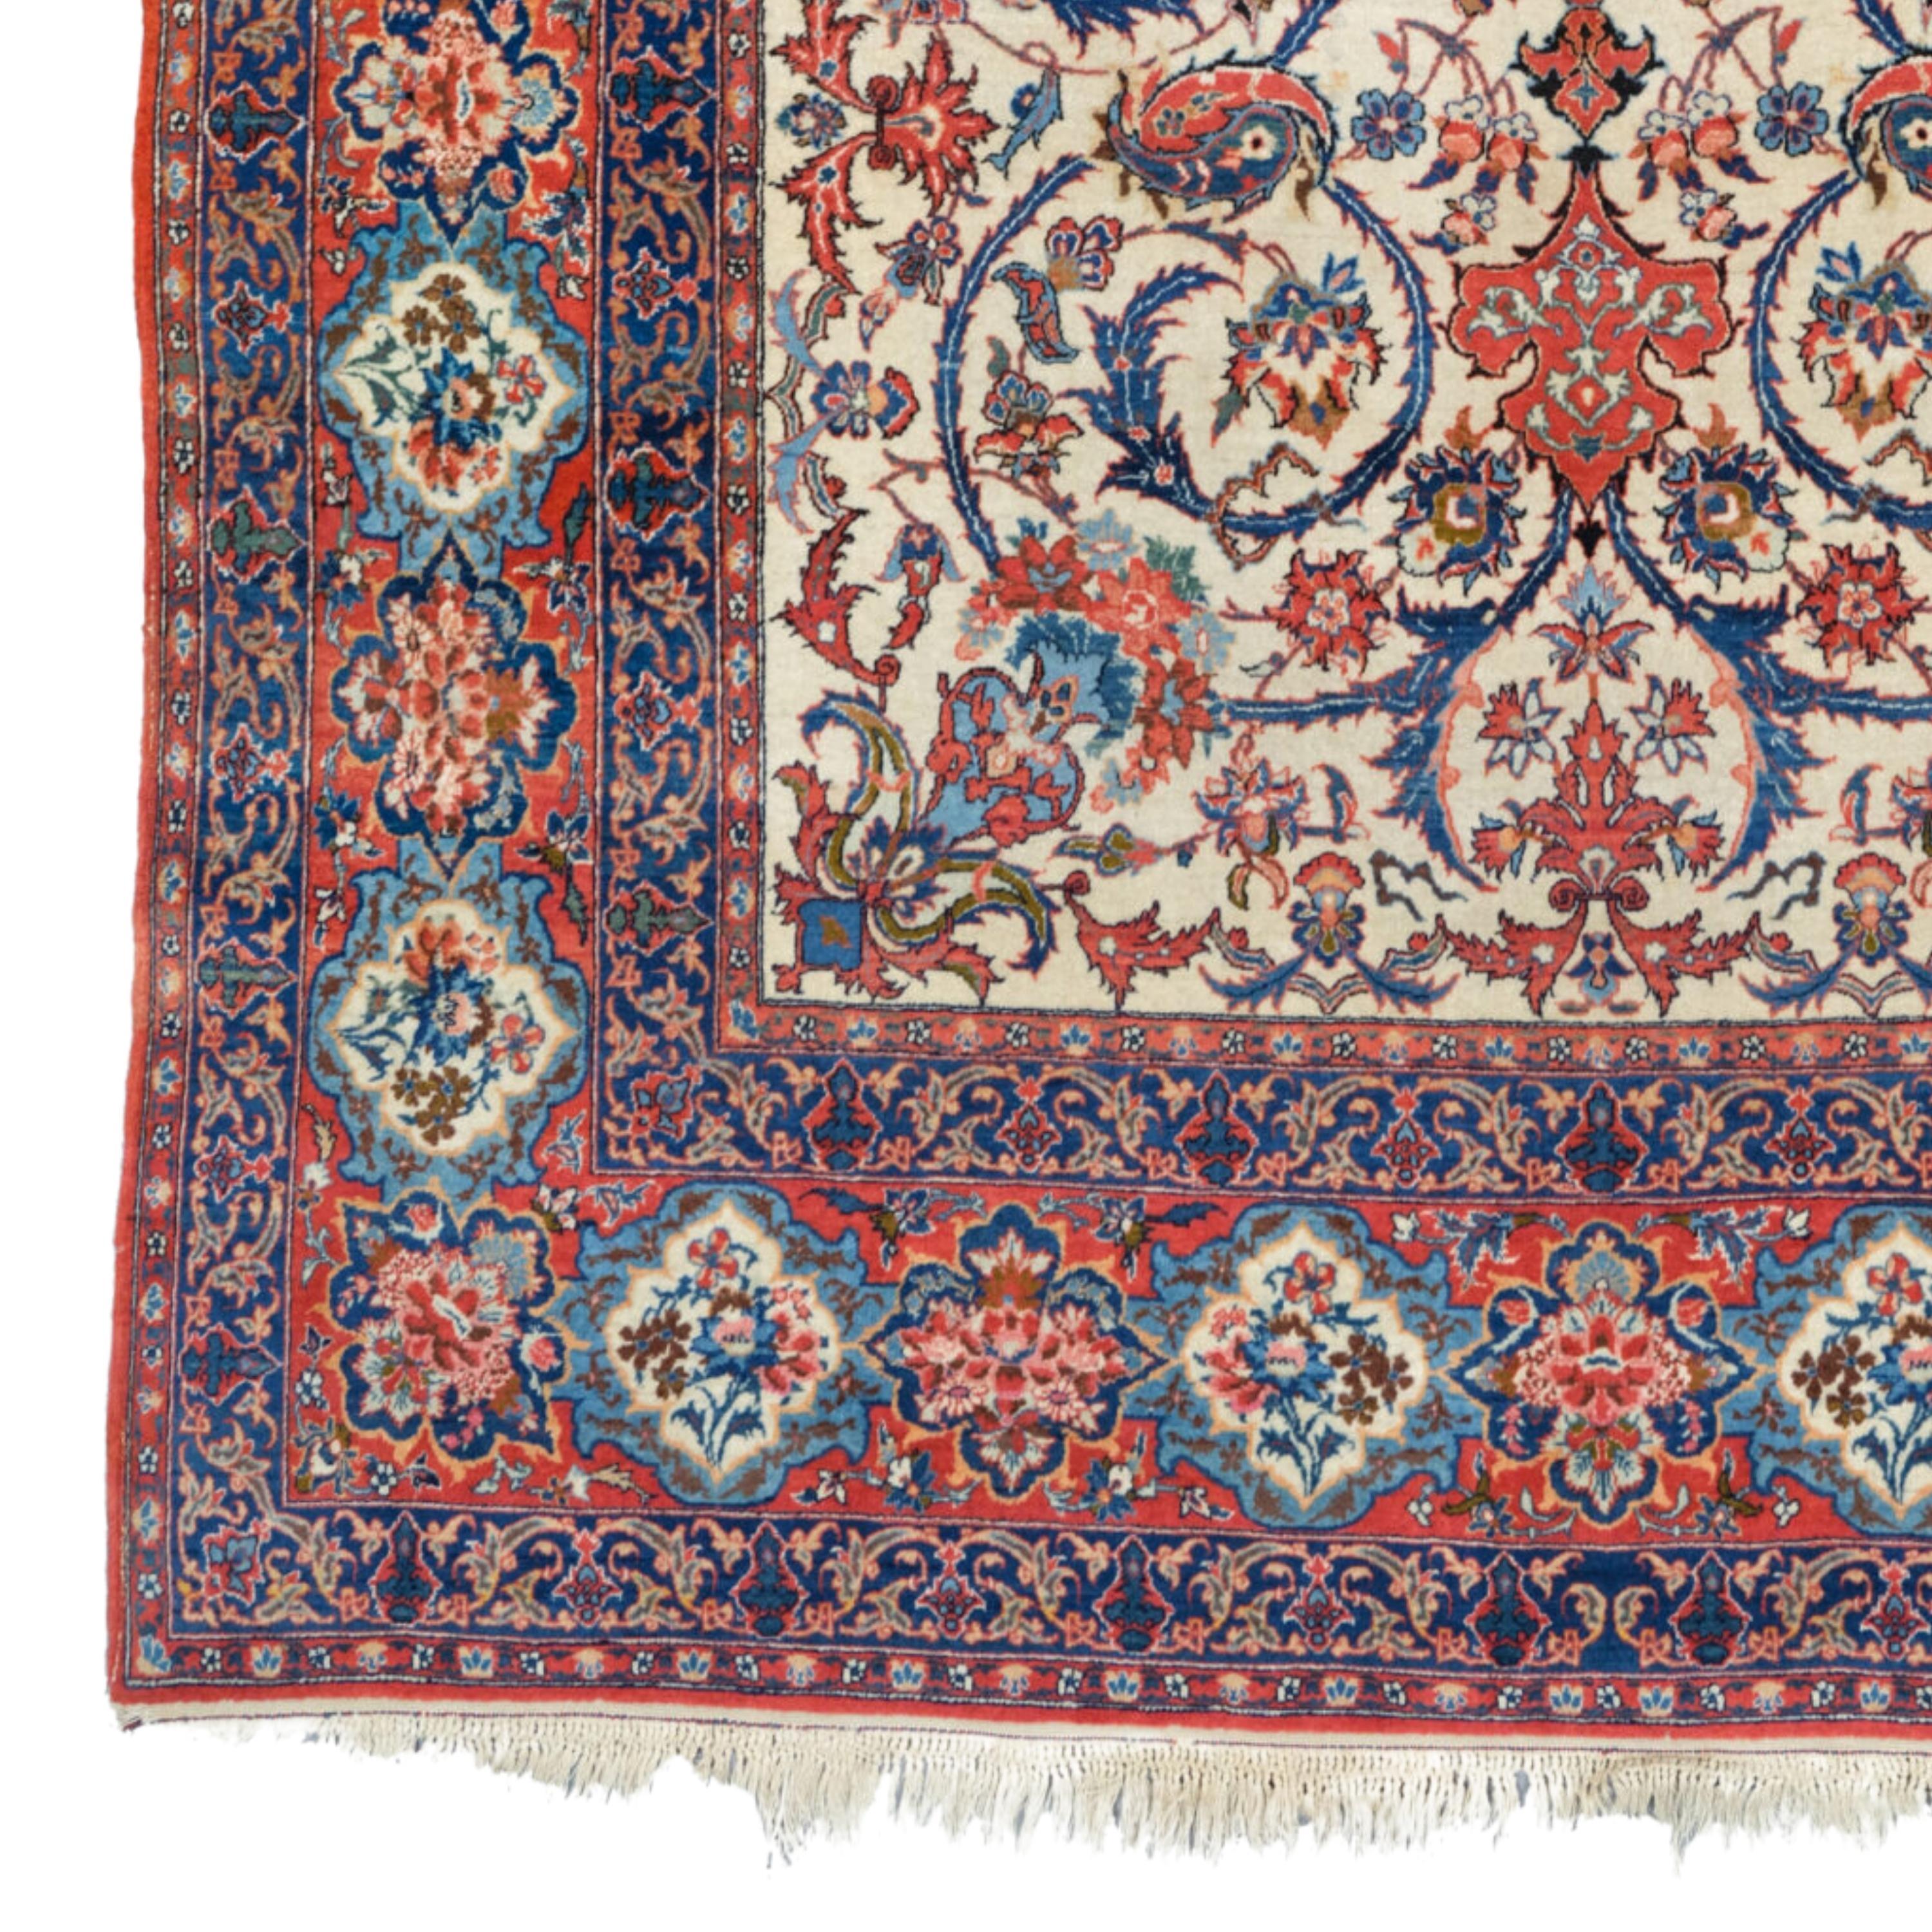 Antique Isfahan Rug - Late of 19th Century Isfahan Rug, Antique Rugs 147x217 cm (57,8 x 85,4 In)

Carpet weaving revived in Isfahan in the second quarter of the 19th century and expanded rapidly with export production of excellent quality and